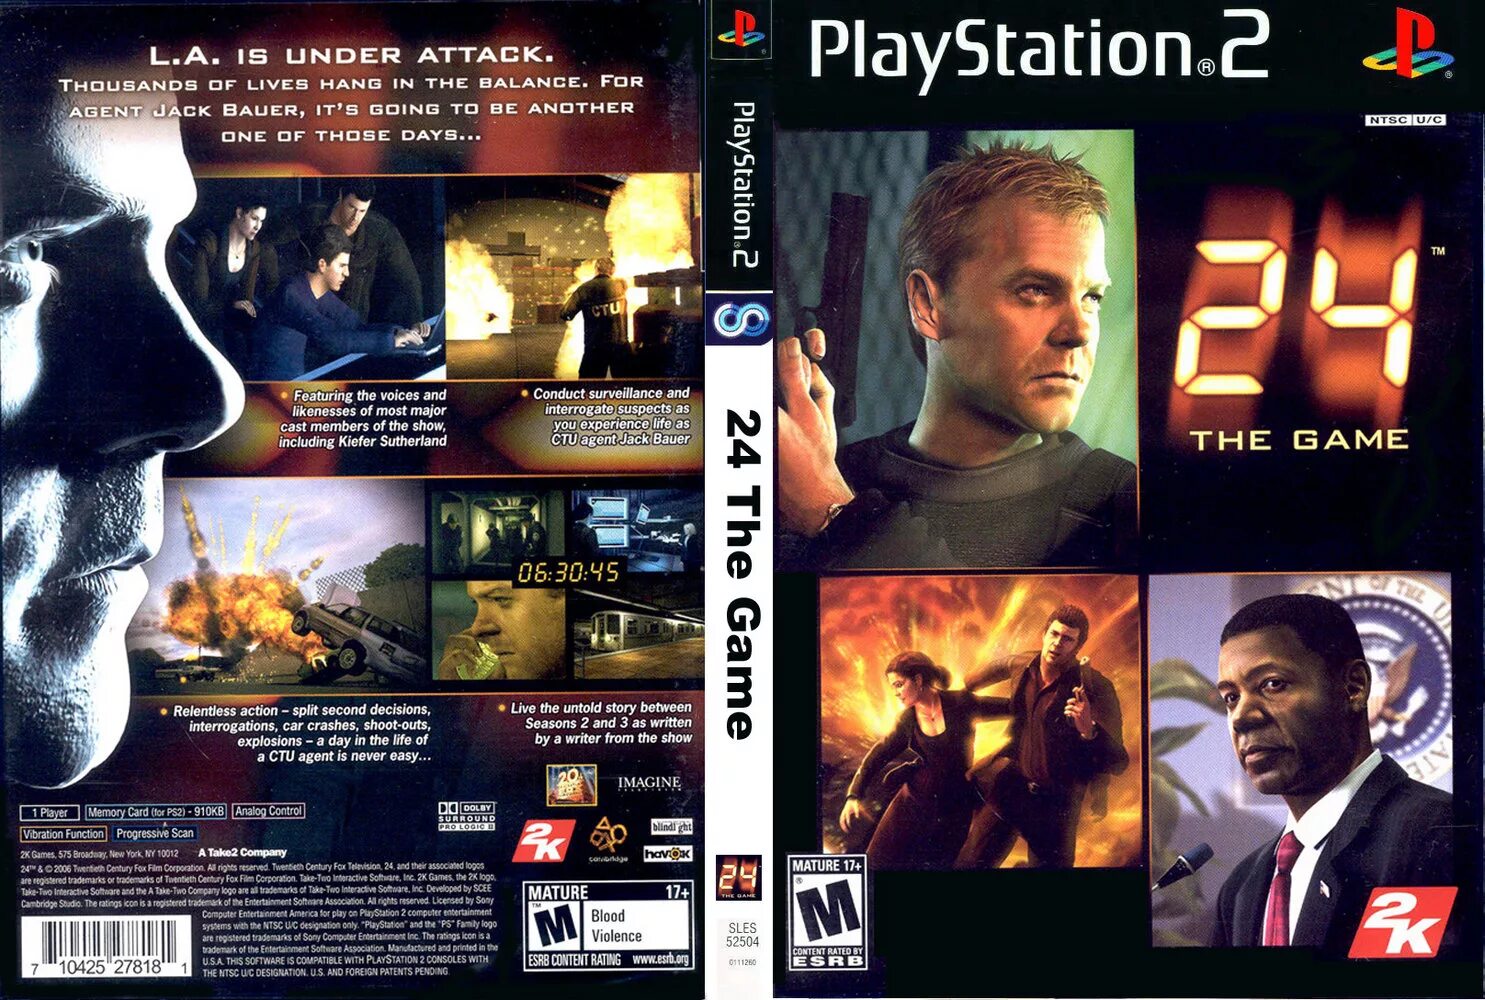 24: The game (ps2). Ps2 games. 24 Часа на ПС 2. Игра 24. 24 hours game